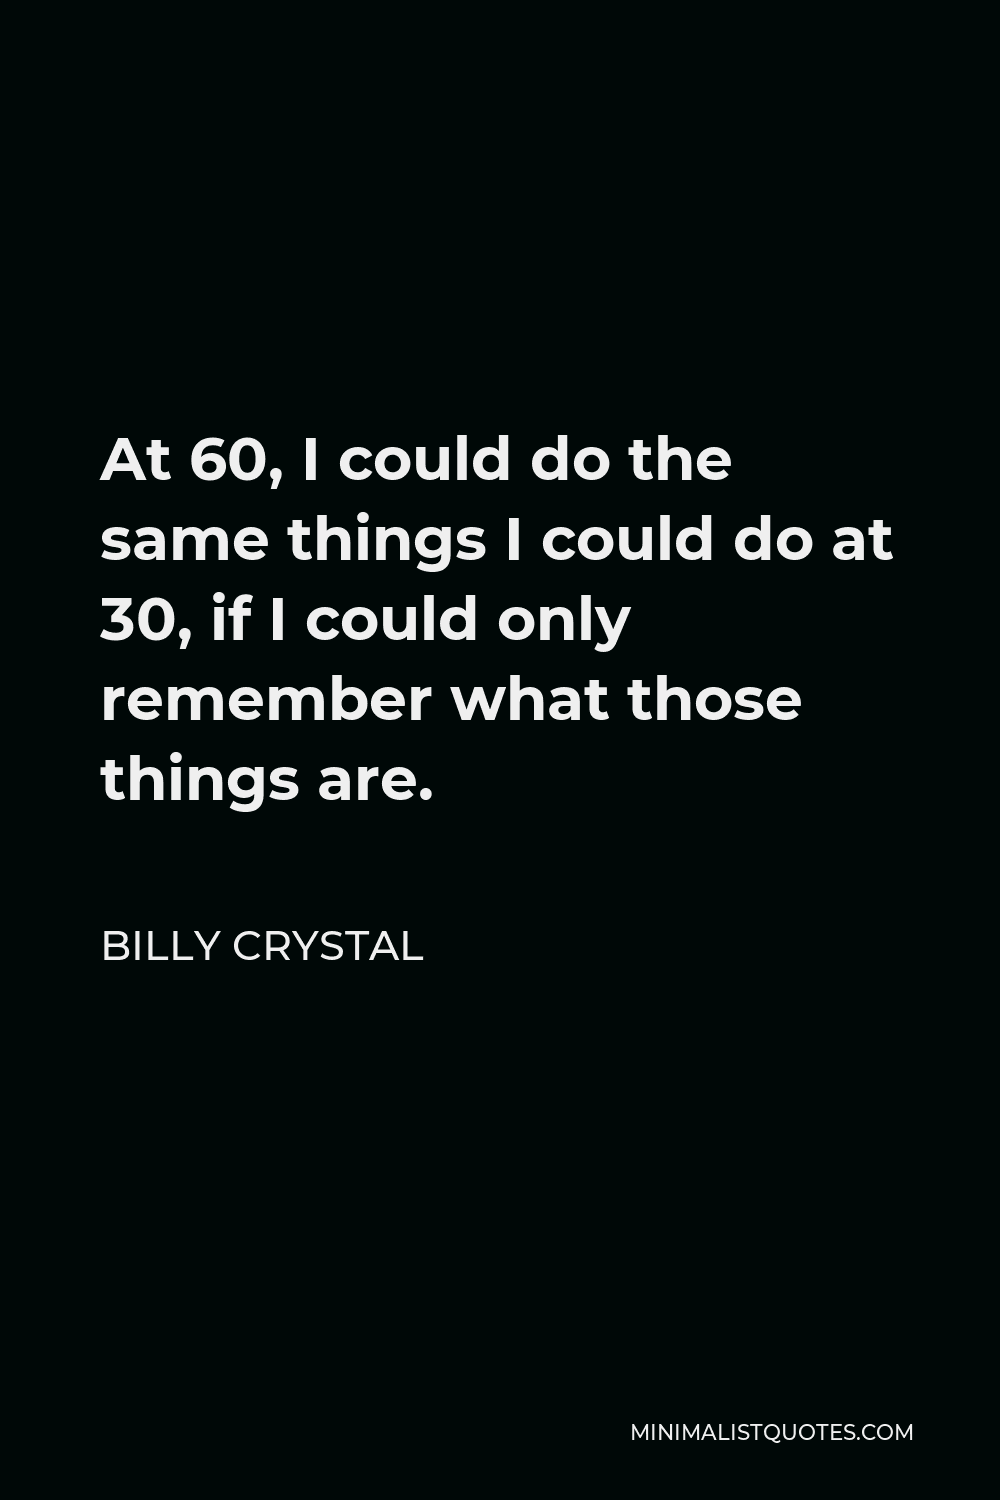 Billy Crystal Quote - At 60, I could do the same things I could do at 30, if I could only remember what those things are.